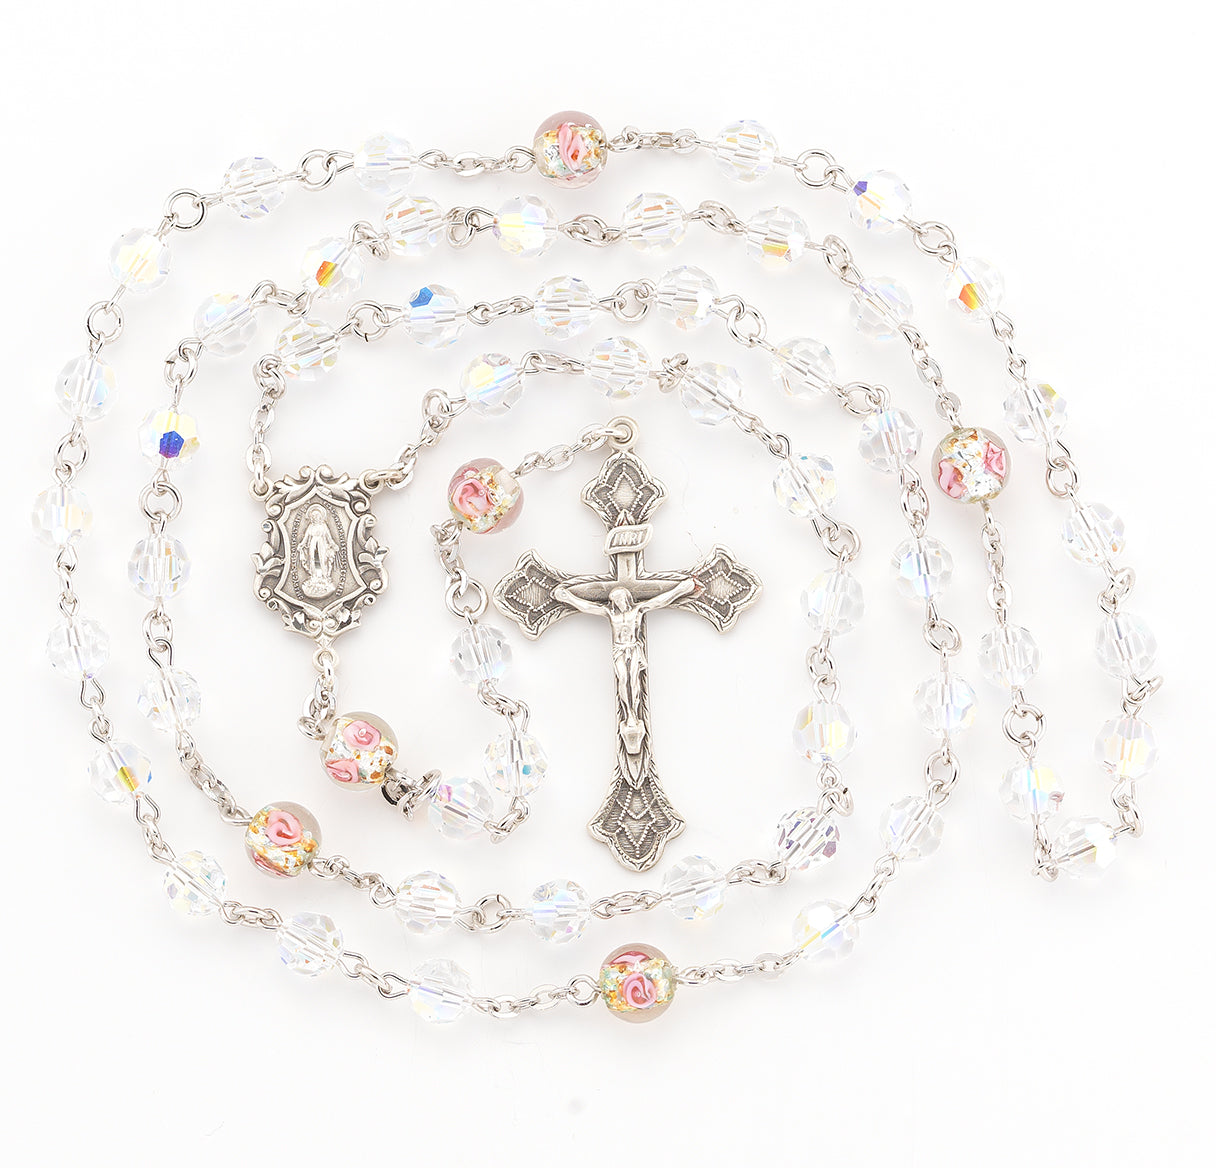 Rosary Sterling Crucifix and Centerpiece Created with Swarovski Crystal 7mm Aurora Borealis Beads by HMH